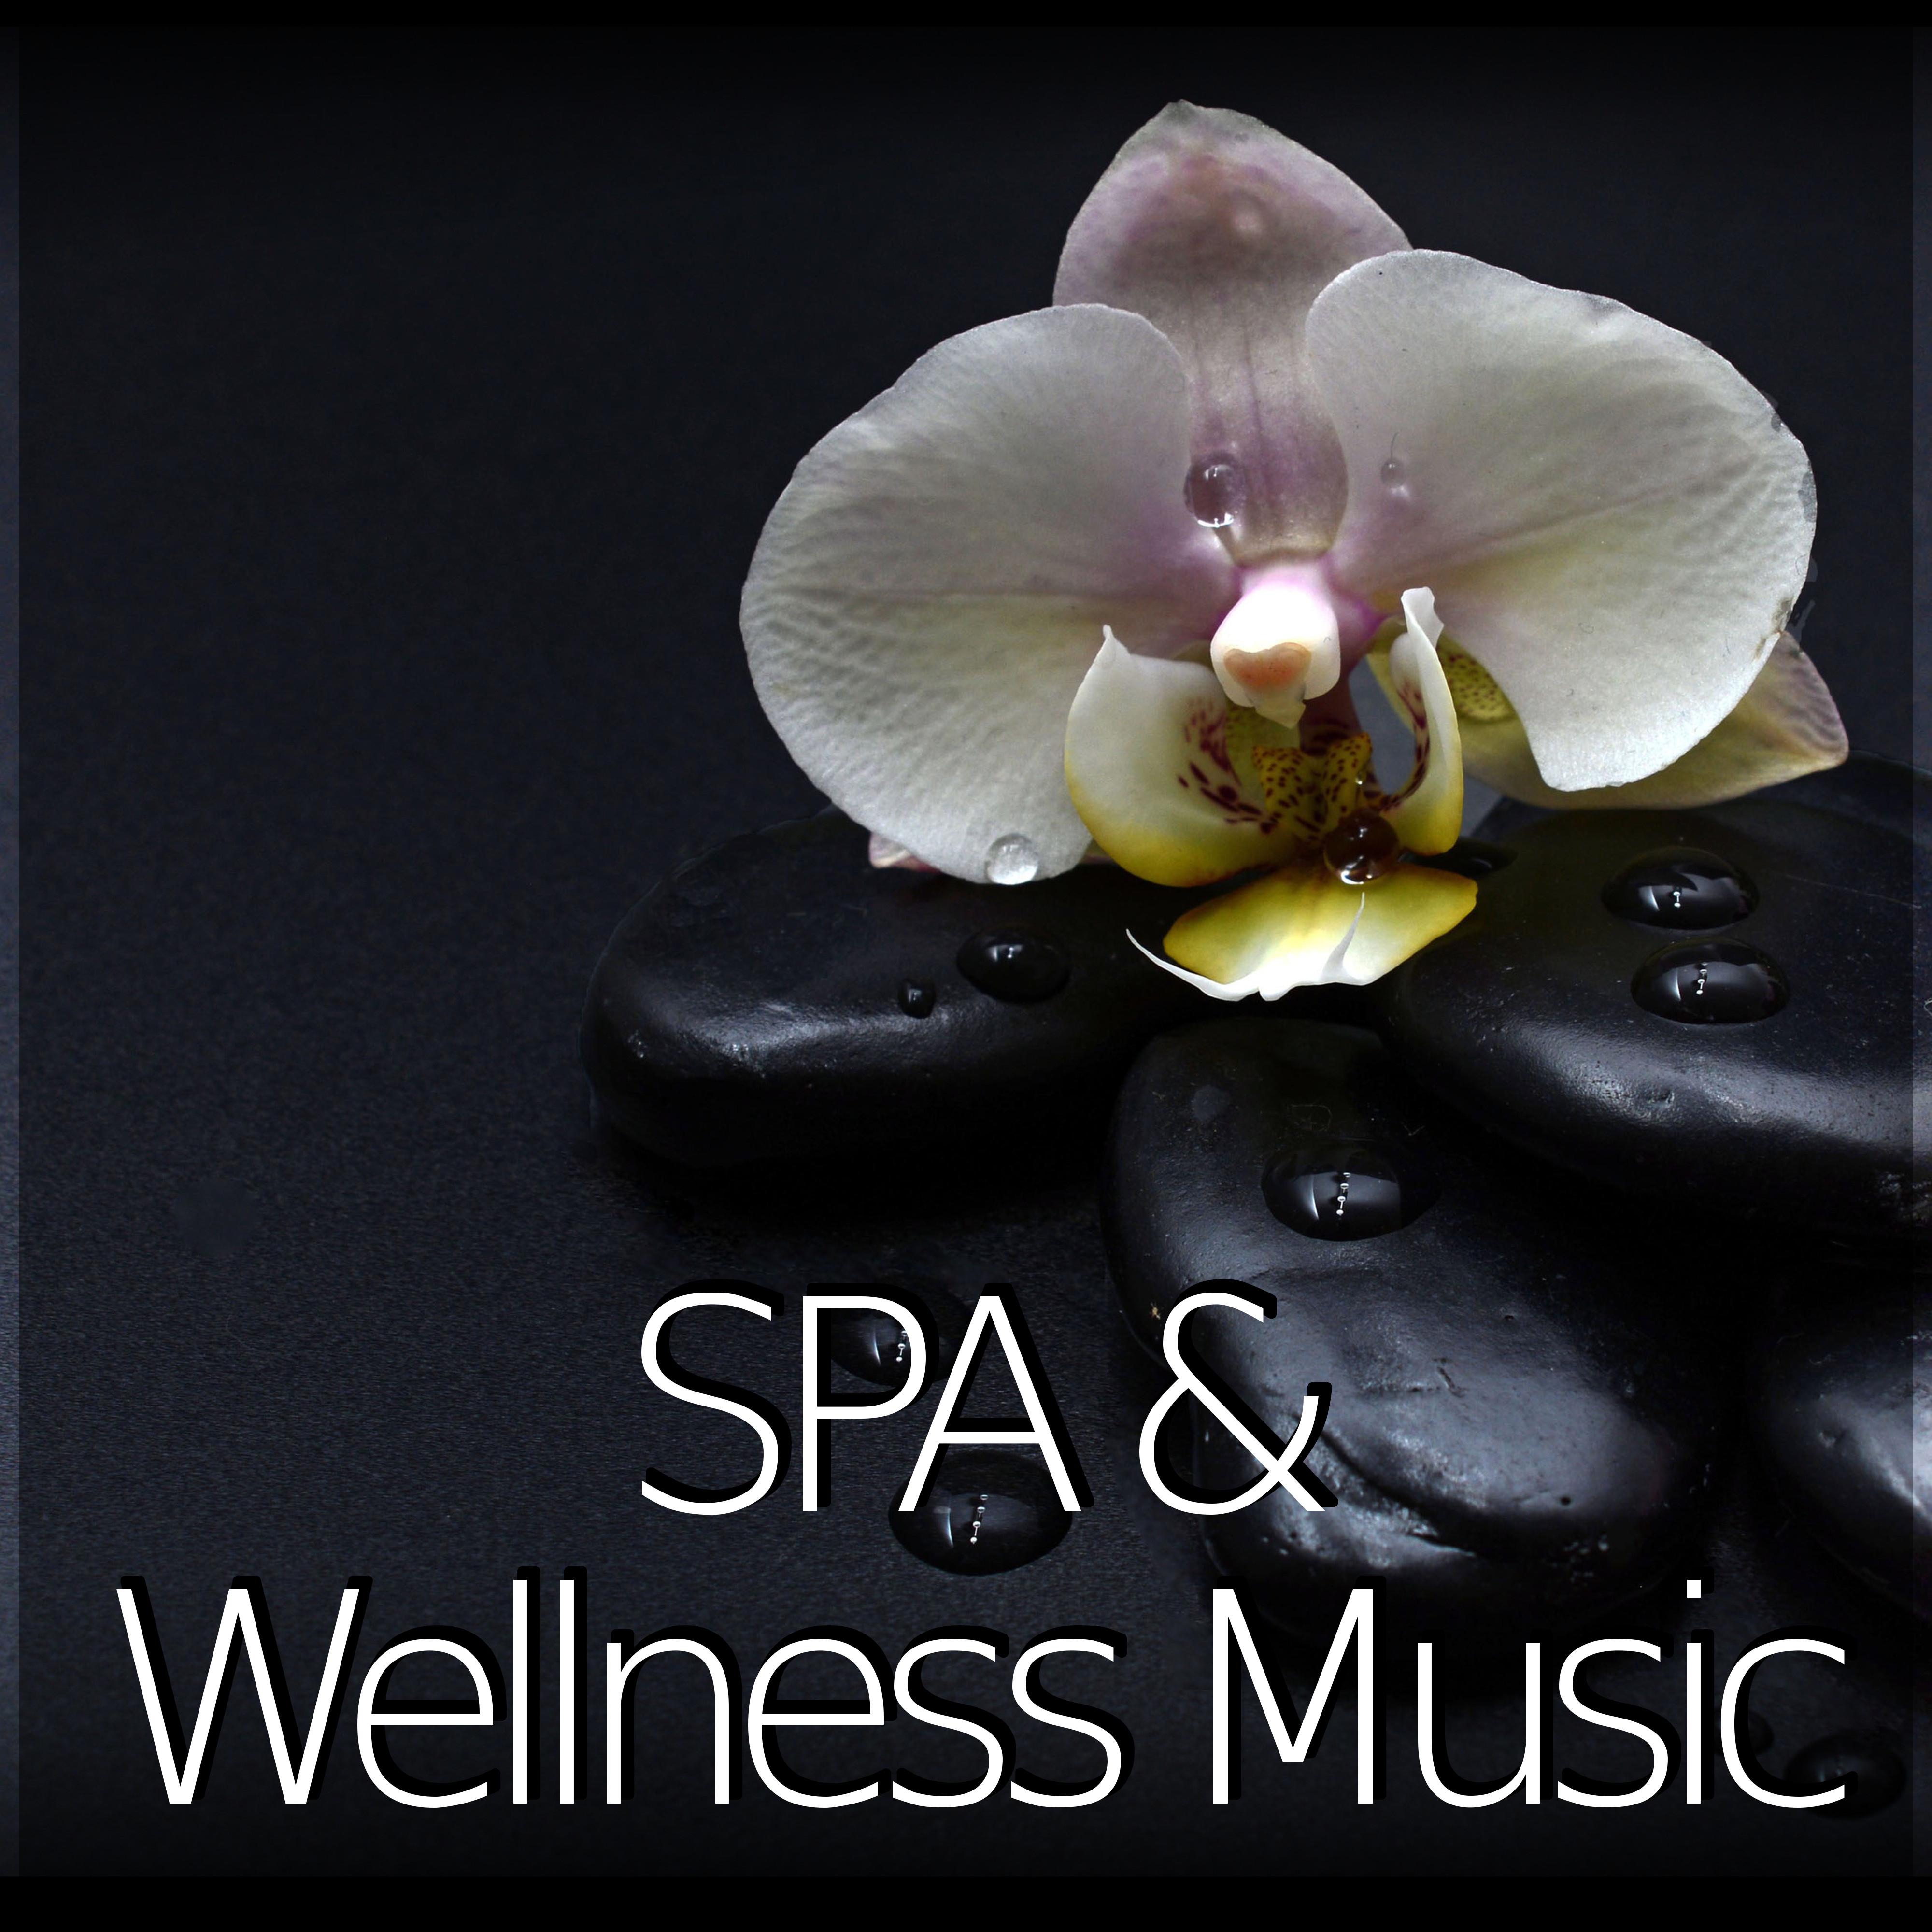 SPA  Wellness Music  Spirytual and Smooth Background Music with Nature Sounds for Beauty Therapy, Shiatsu and Aromatherapy, Healing by Touch, Mindfulness Meditation and Relaxation